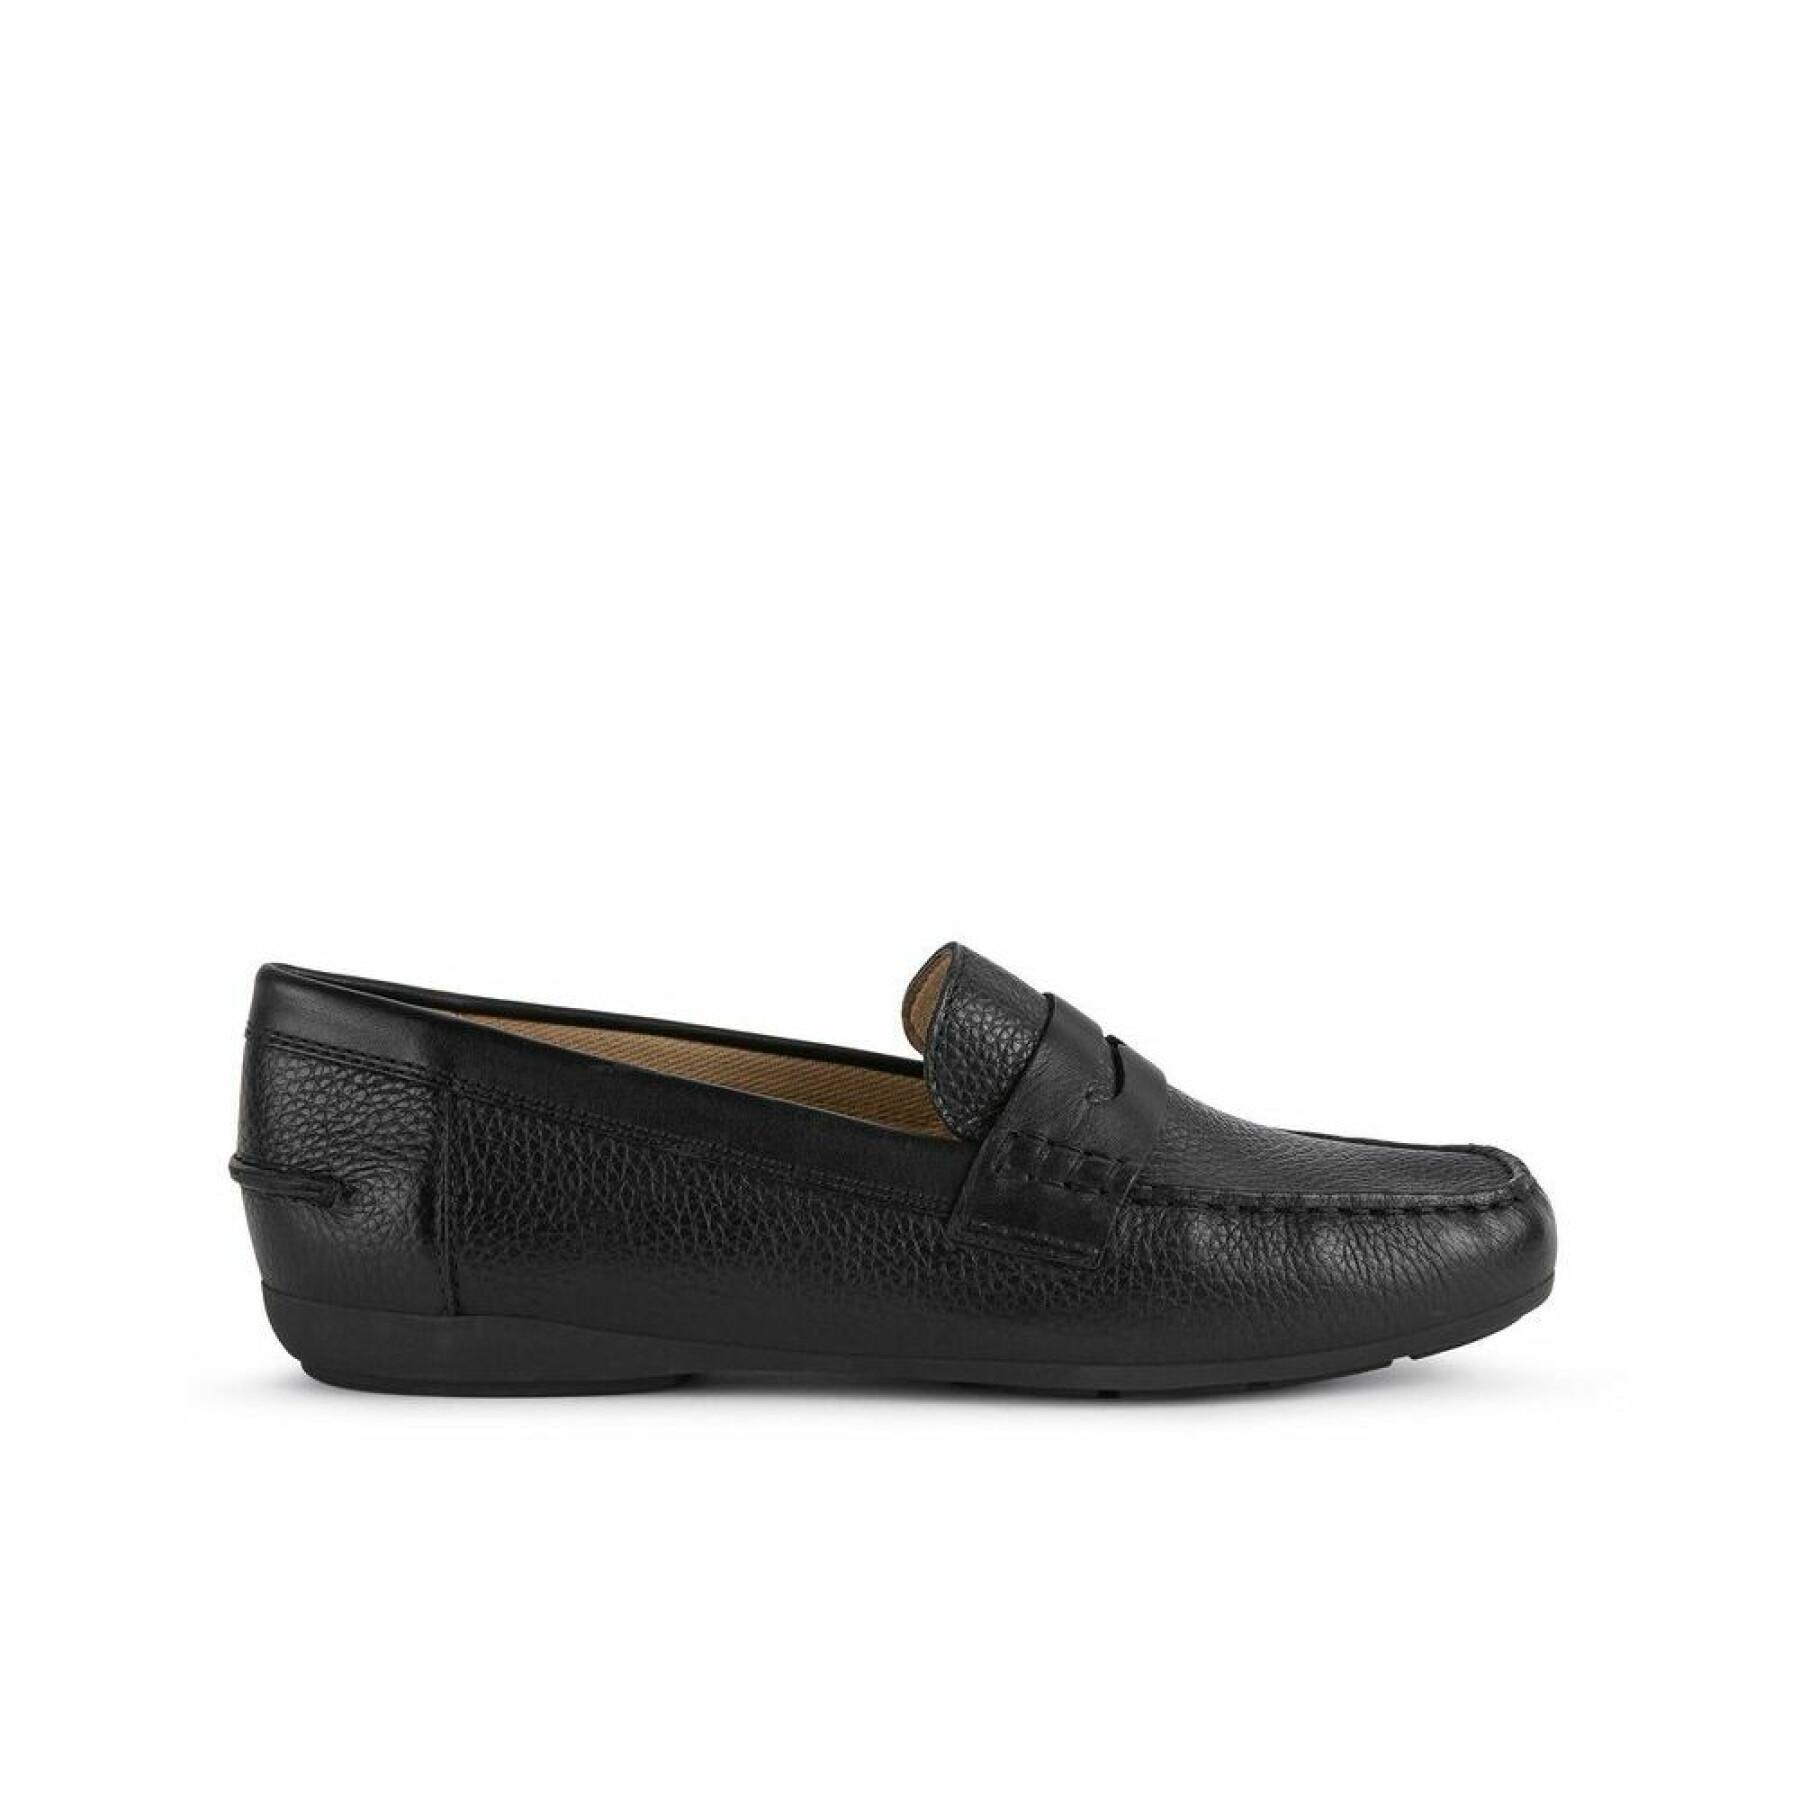 Leather loafers woman Geox Annytah Moc